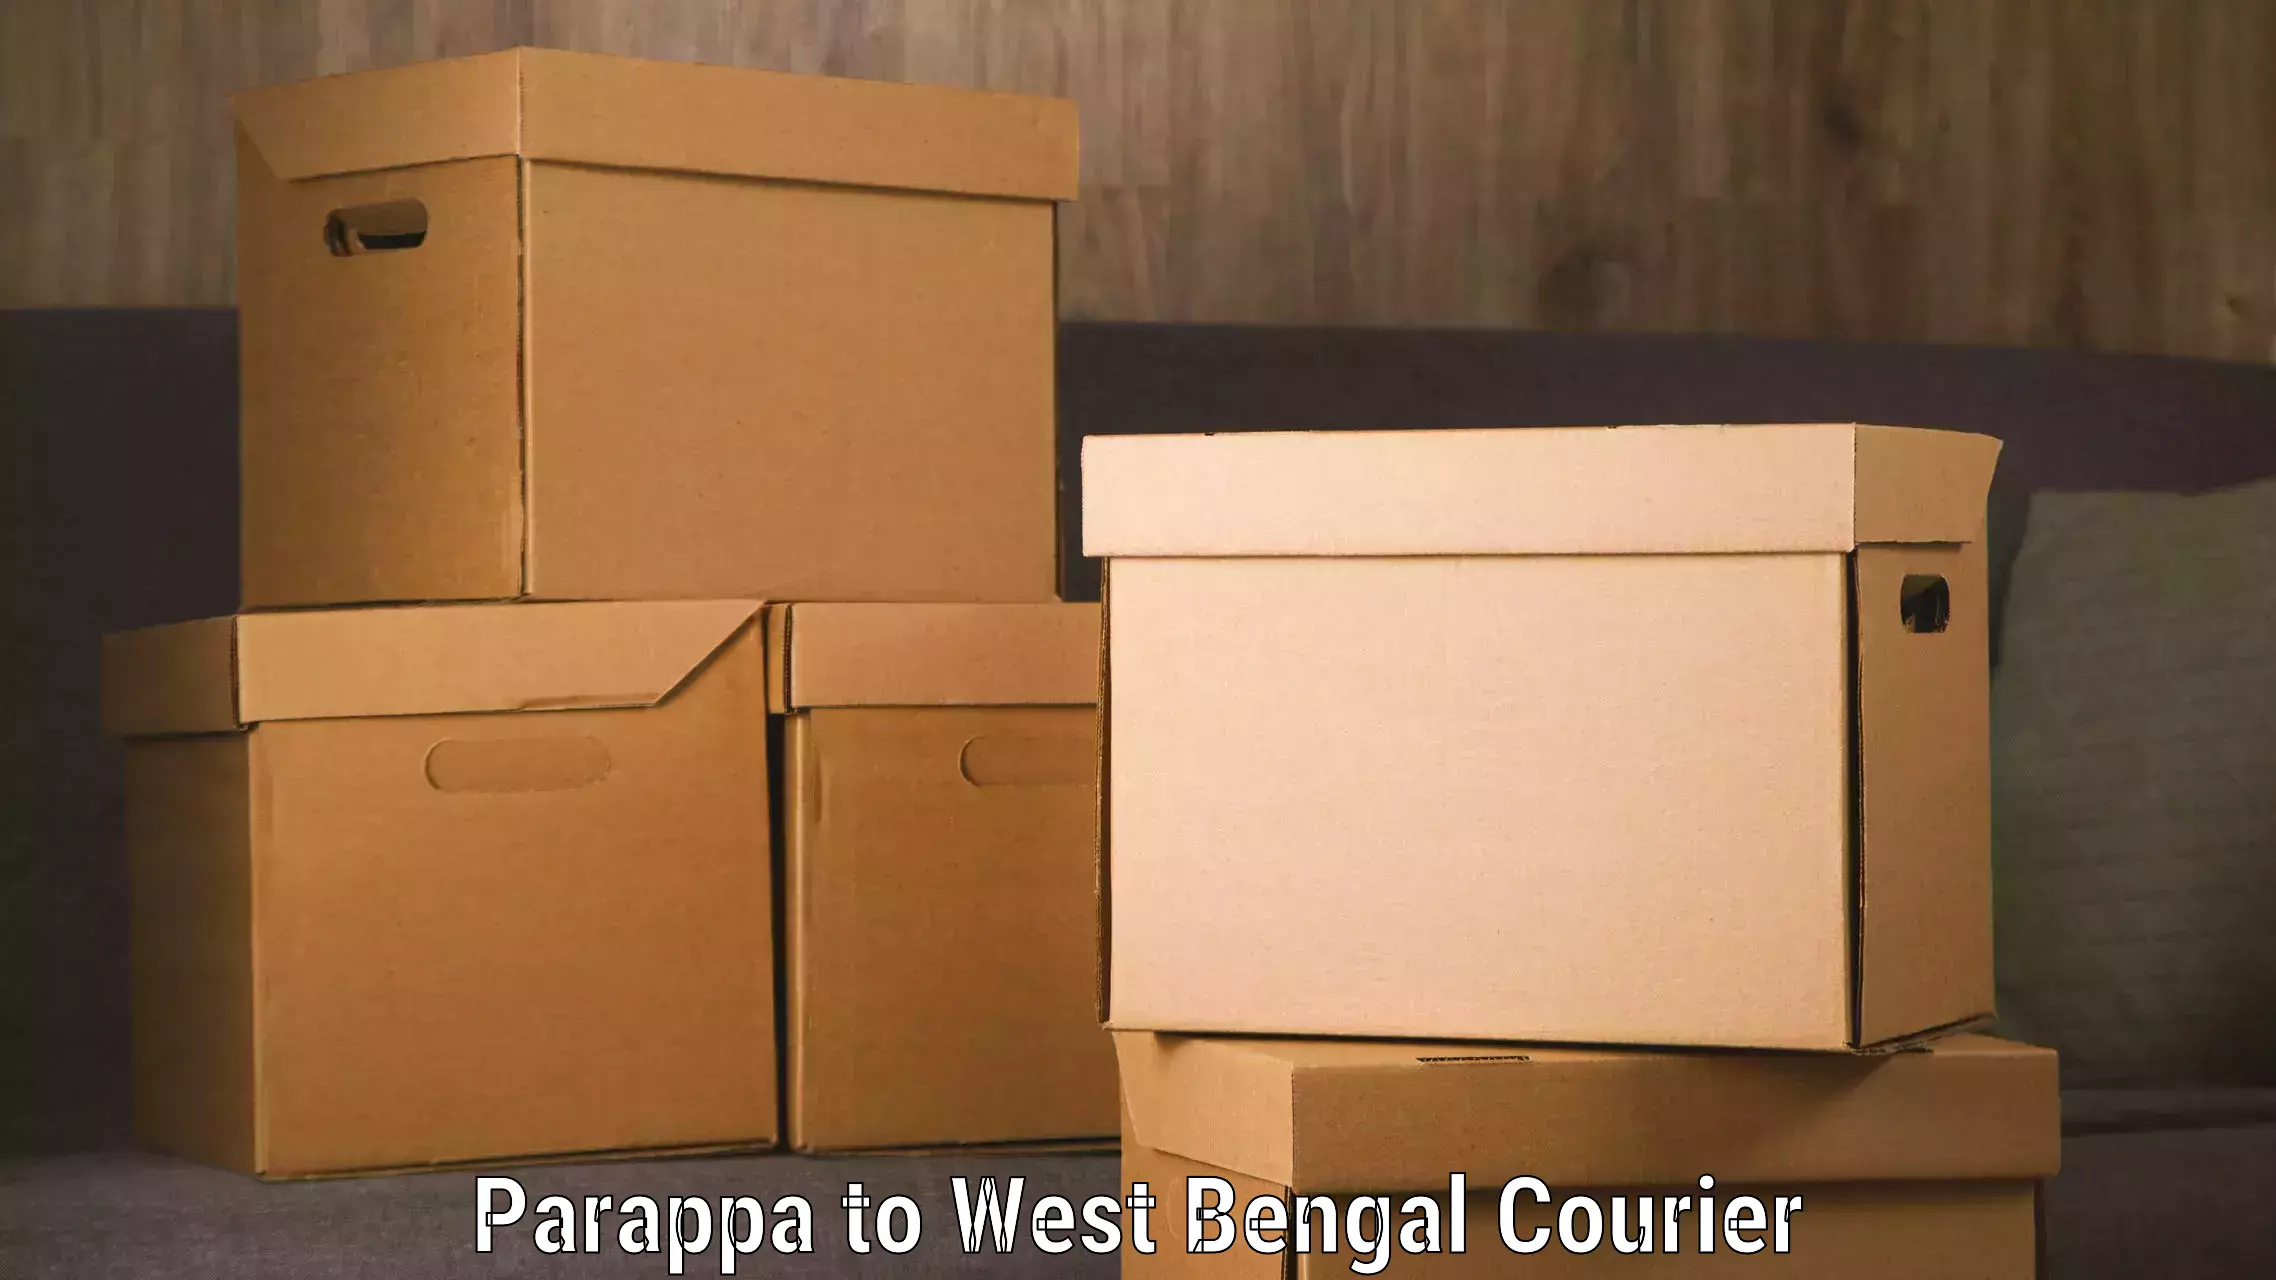 Reliable courier service in Parappa to West Bengal